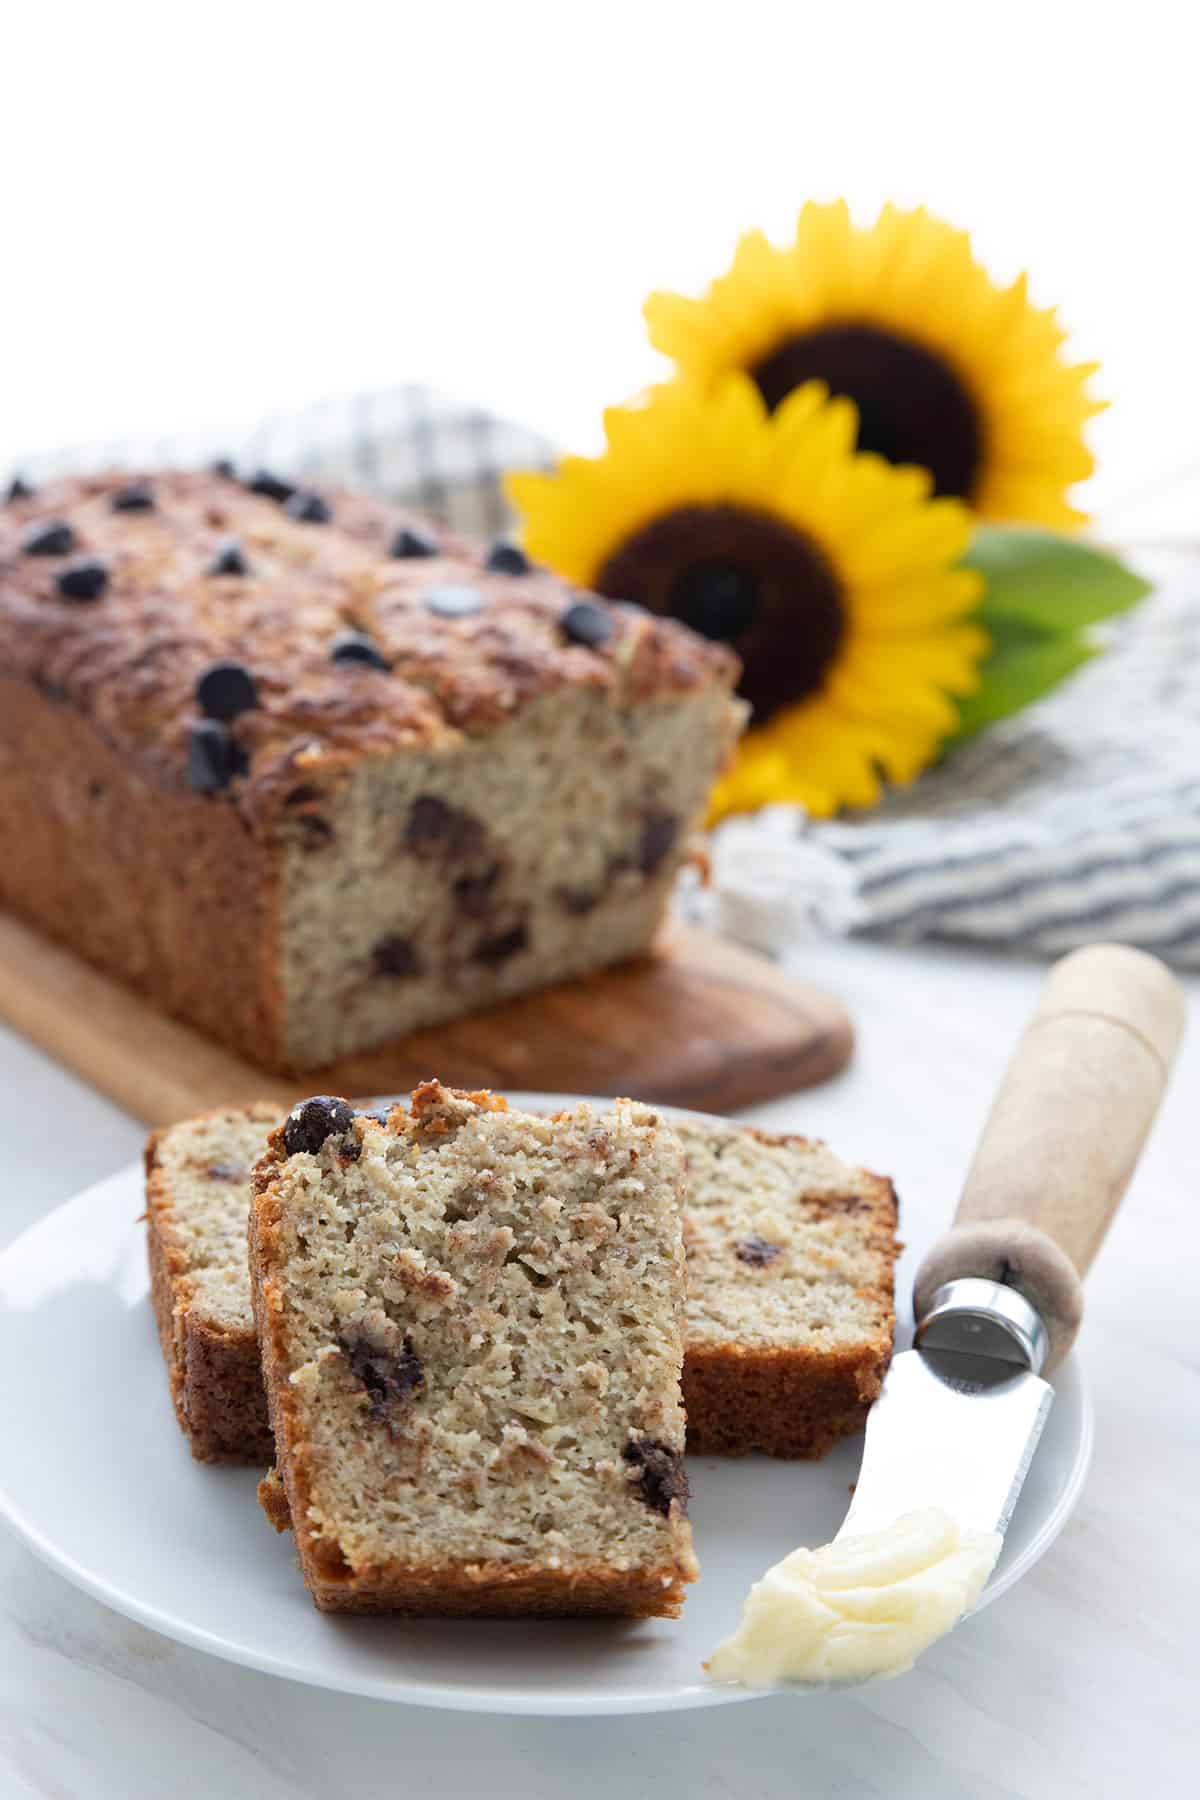 A slice of keto banana bread on a white plate, with the loaf and some sunflowers in the background.